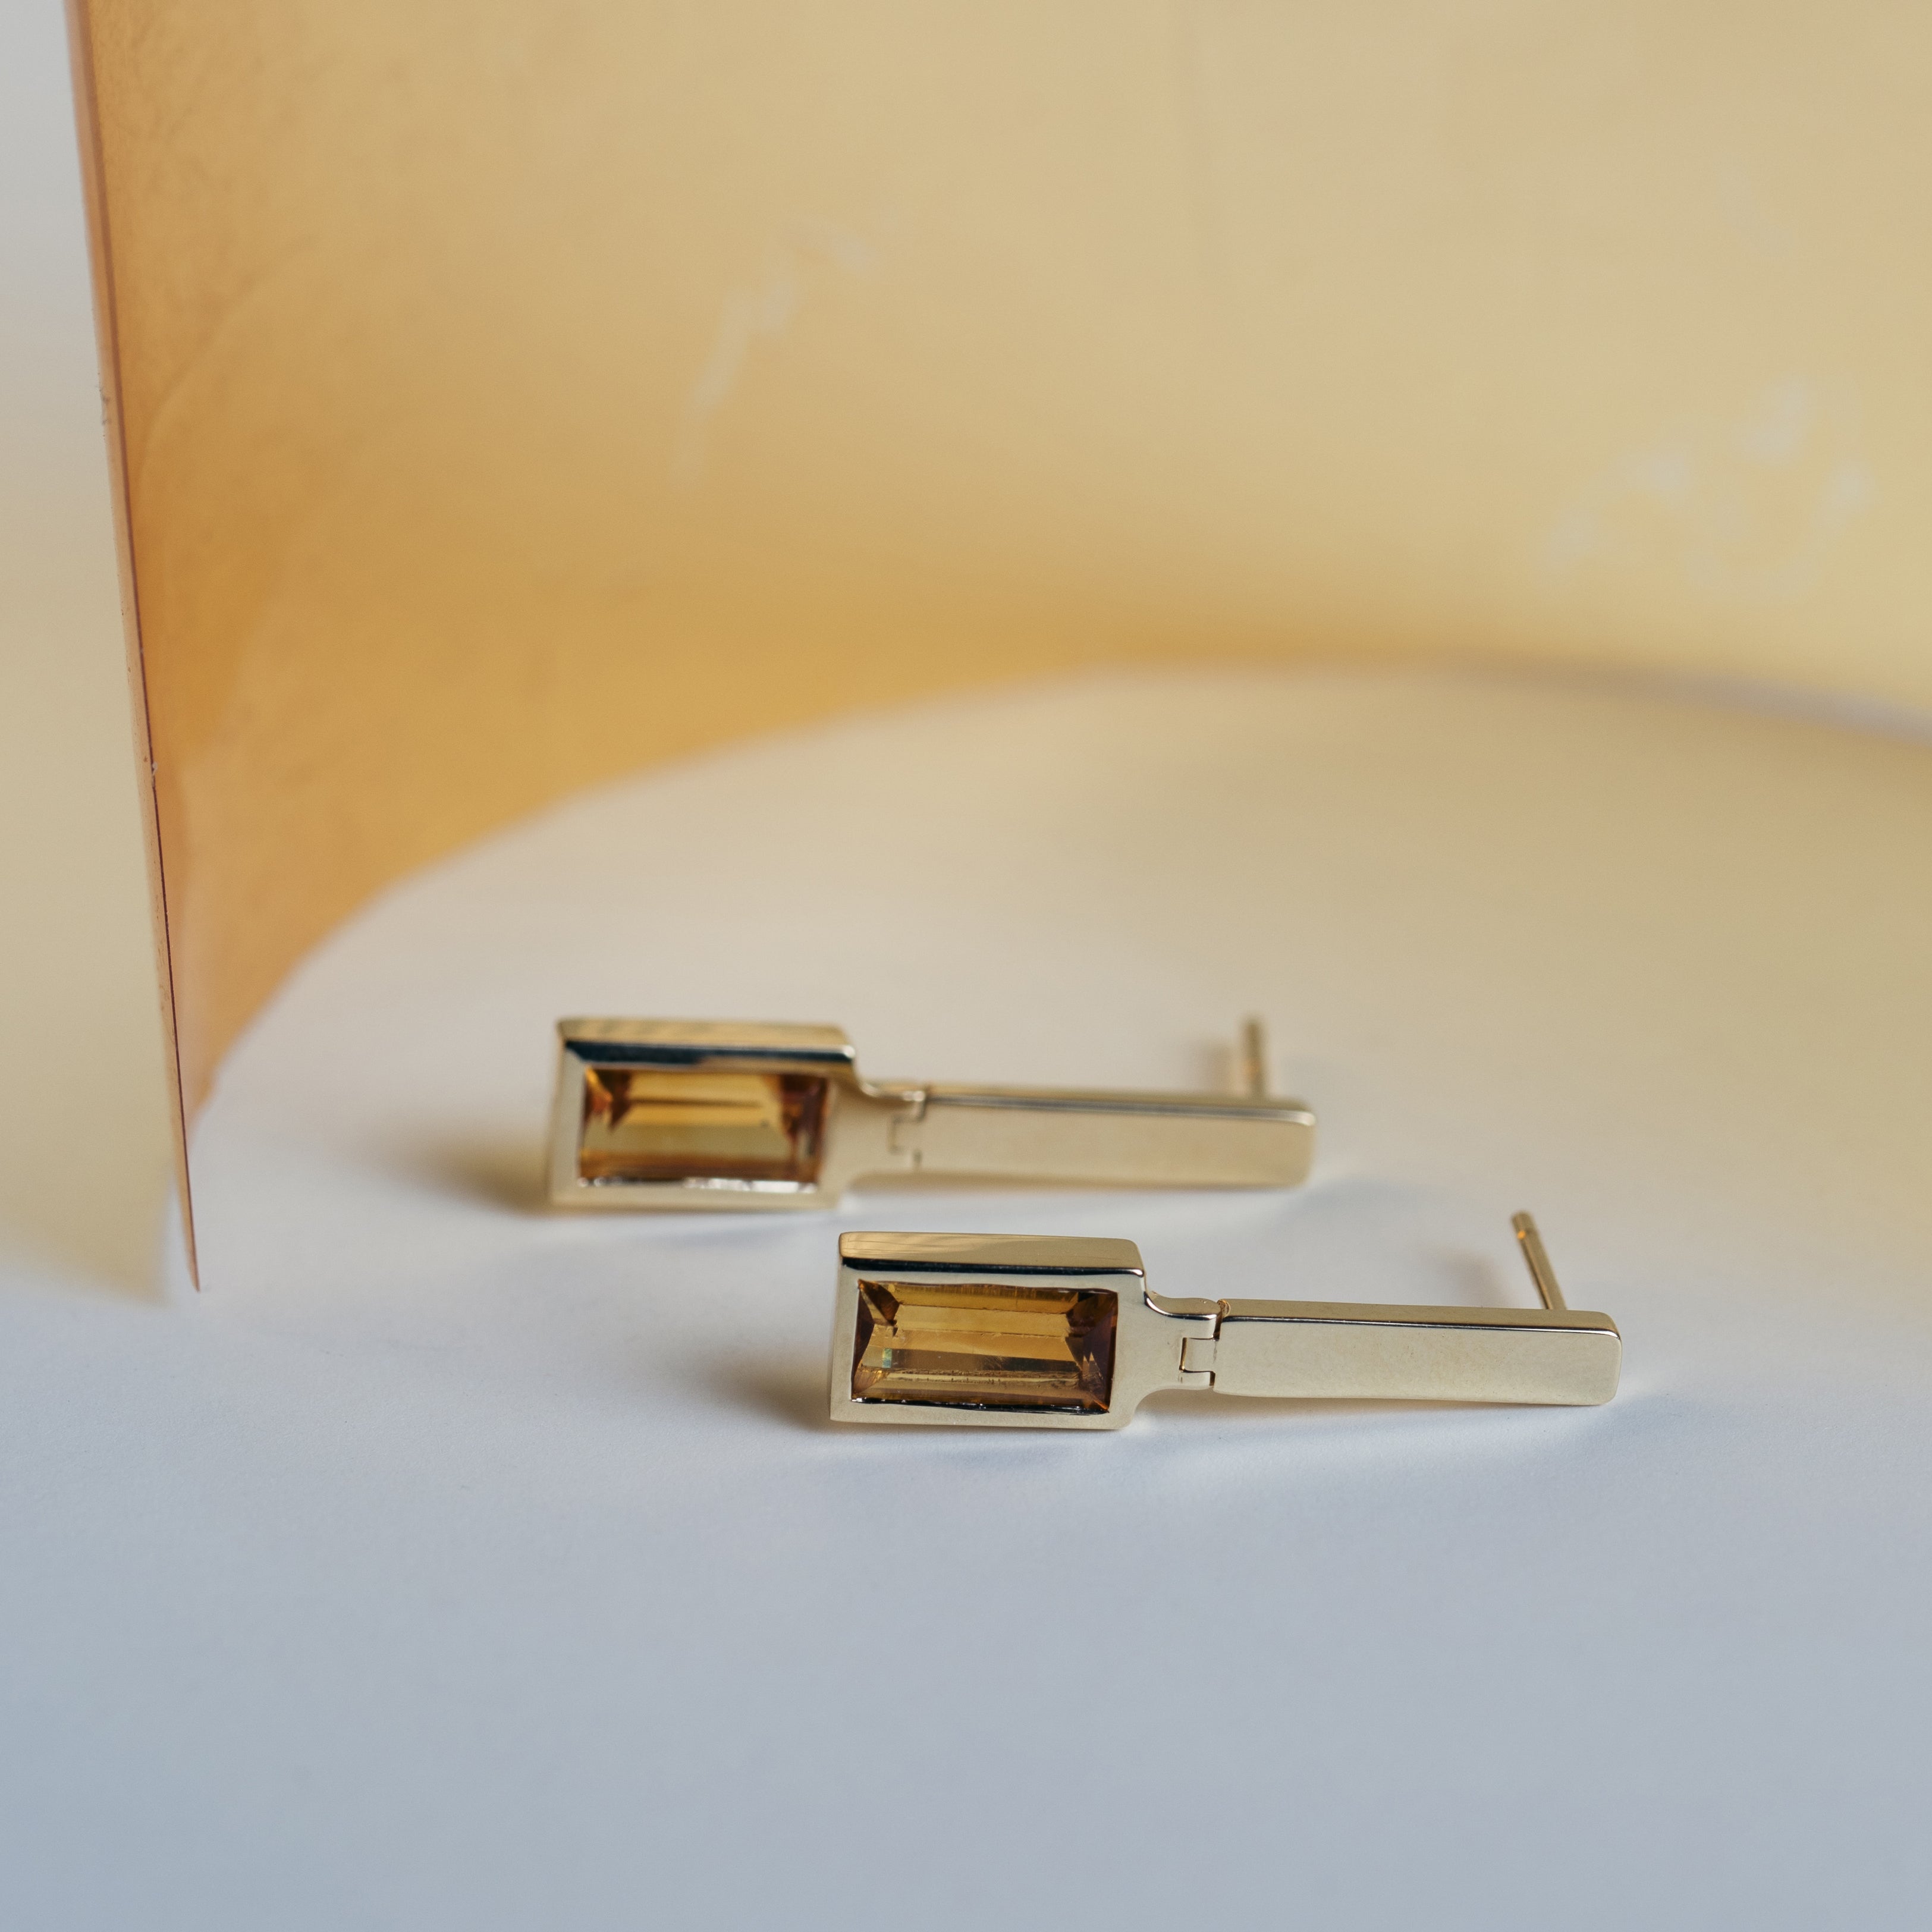 Amy Delicate Earrings 14k Yellow Gold Set With Citrine By SHW Fine Jewelry NYC